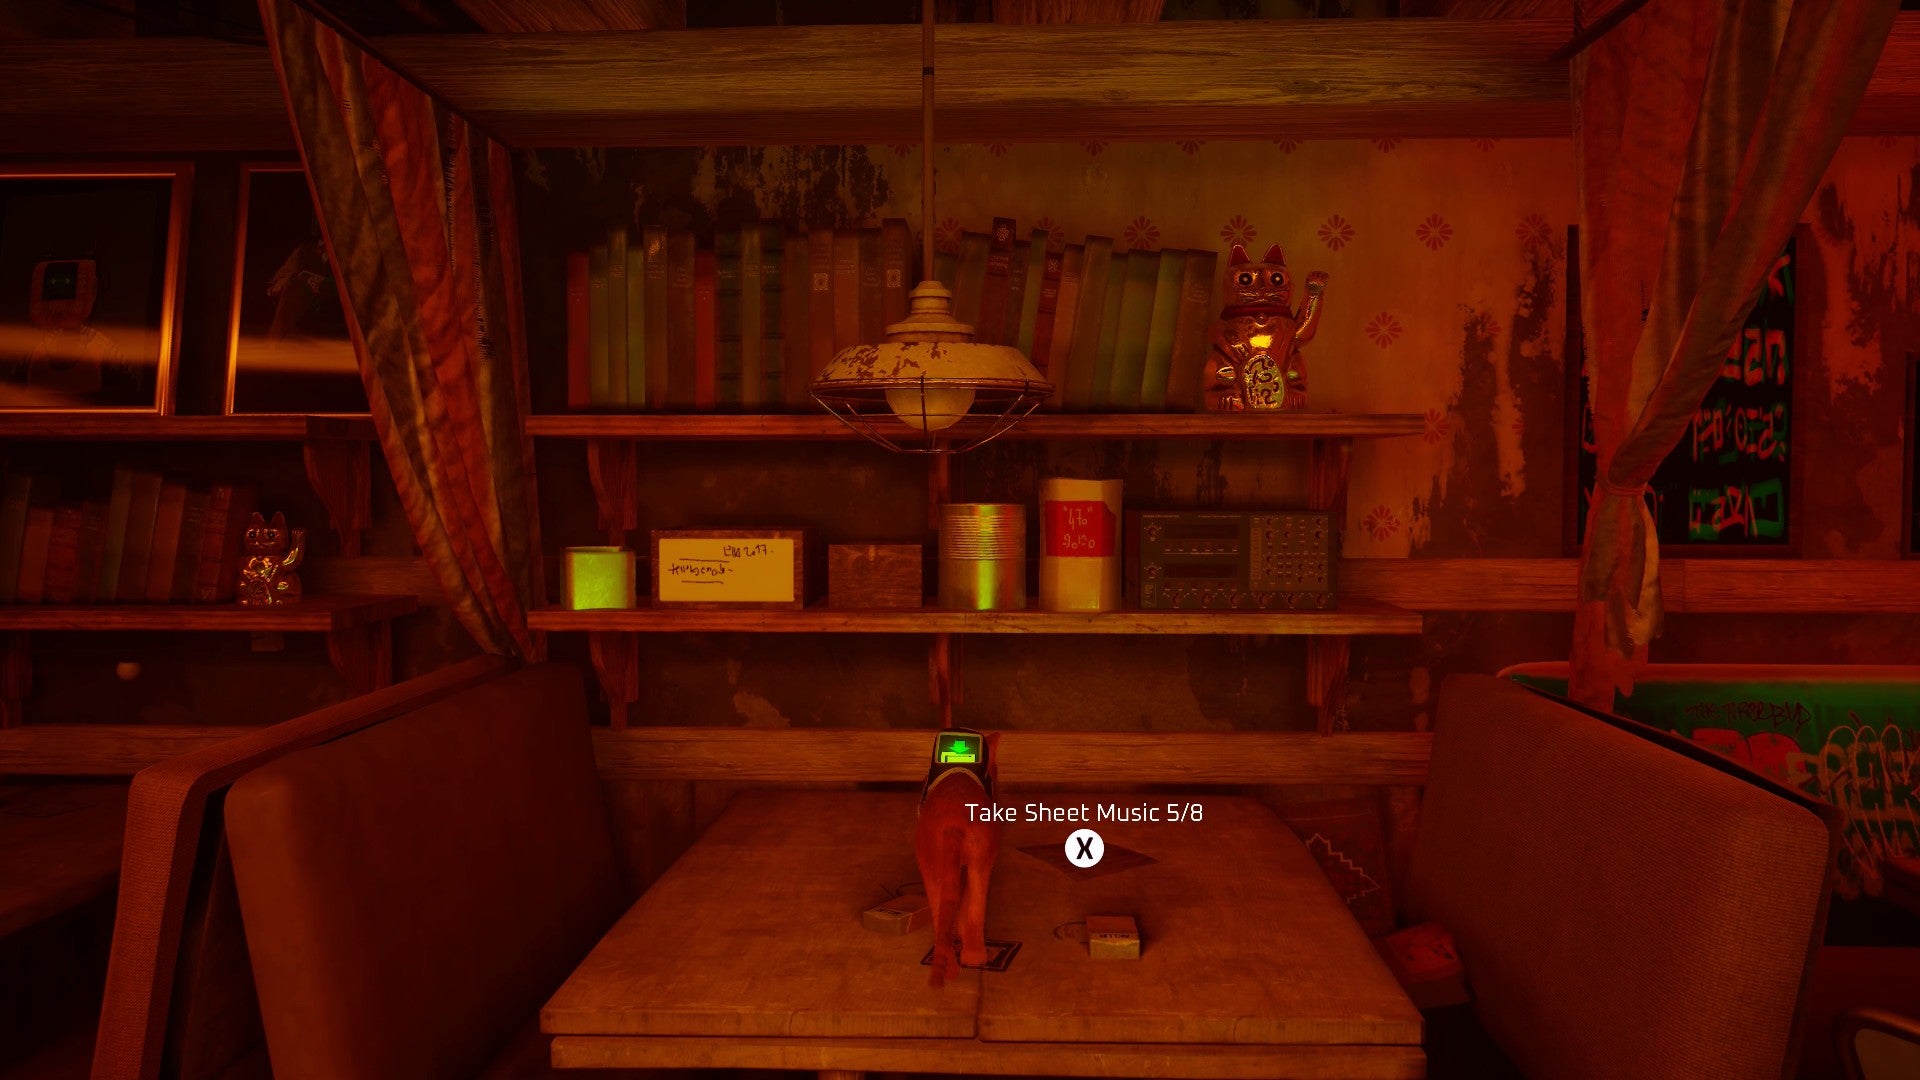 Stray screenshot showing a cat on top of a table in a bar booth. The room is illuminated in a dim red light, and the cat is staring at a piece of sheet music on the table.